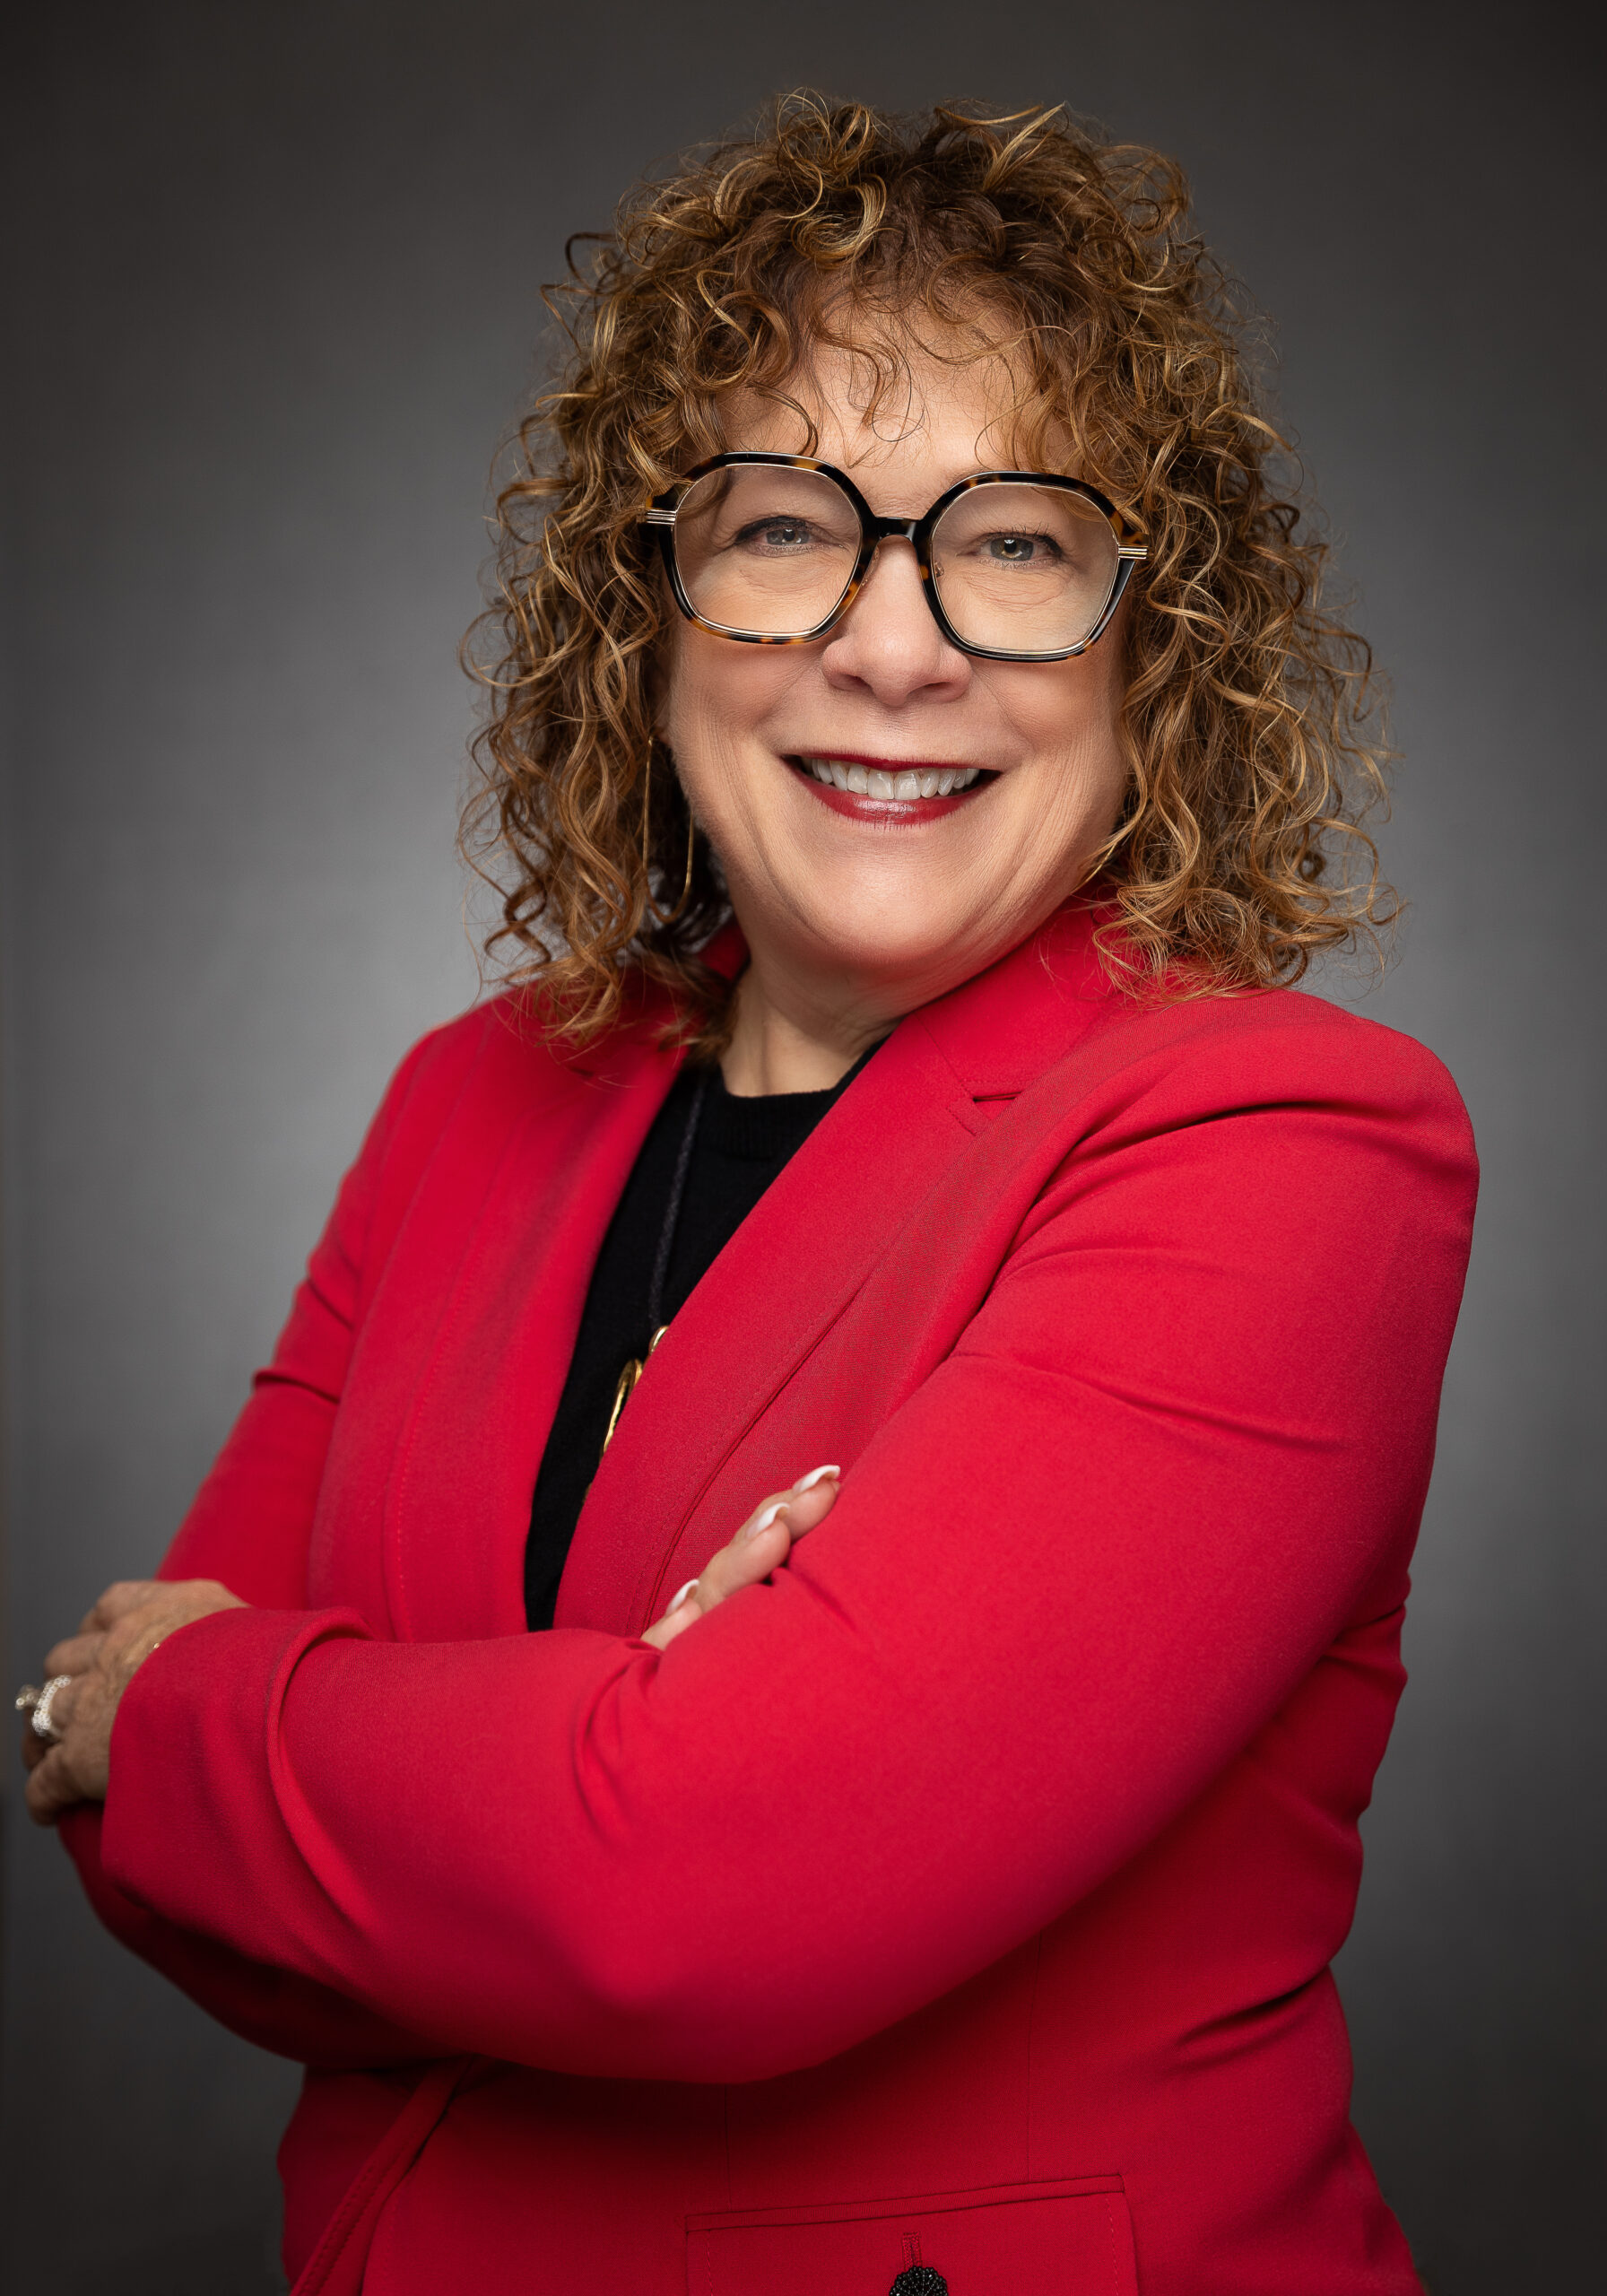 MEMBERS FIRST CREDIT UNION OF FLORIDA ANNOUNCES RETIREMENT OF PRESIDENT AND CEO, CARYL GREENE, AFTER 38 YEARS OF DEDICATED SERVICE